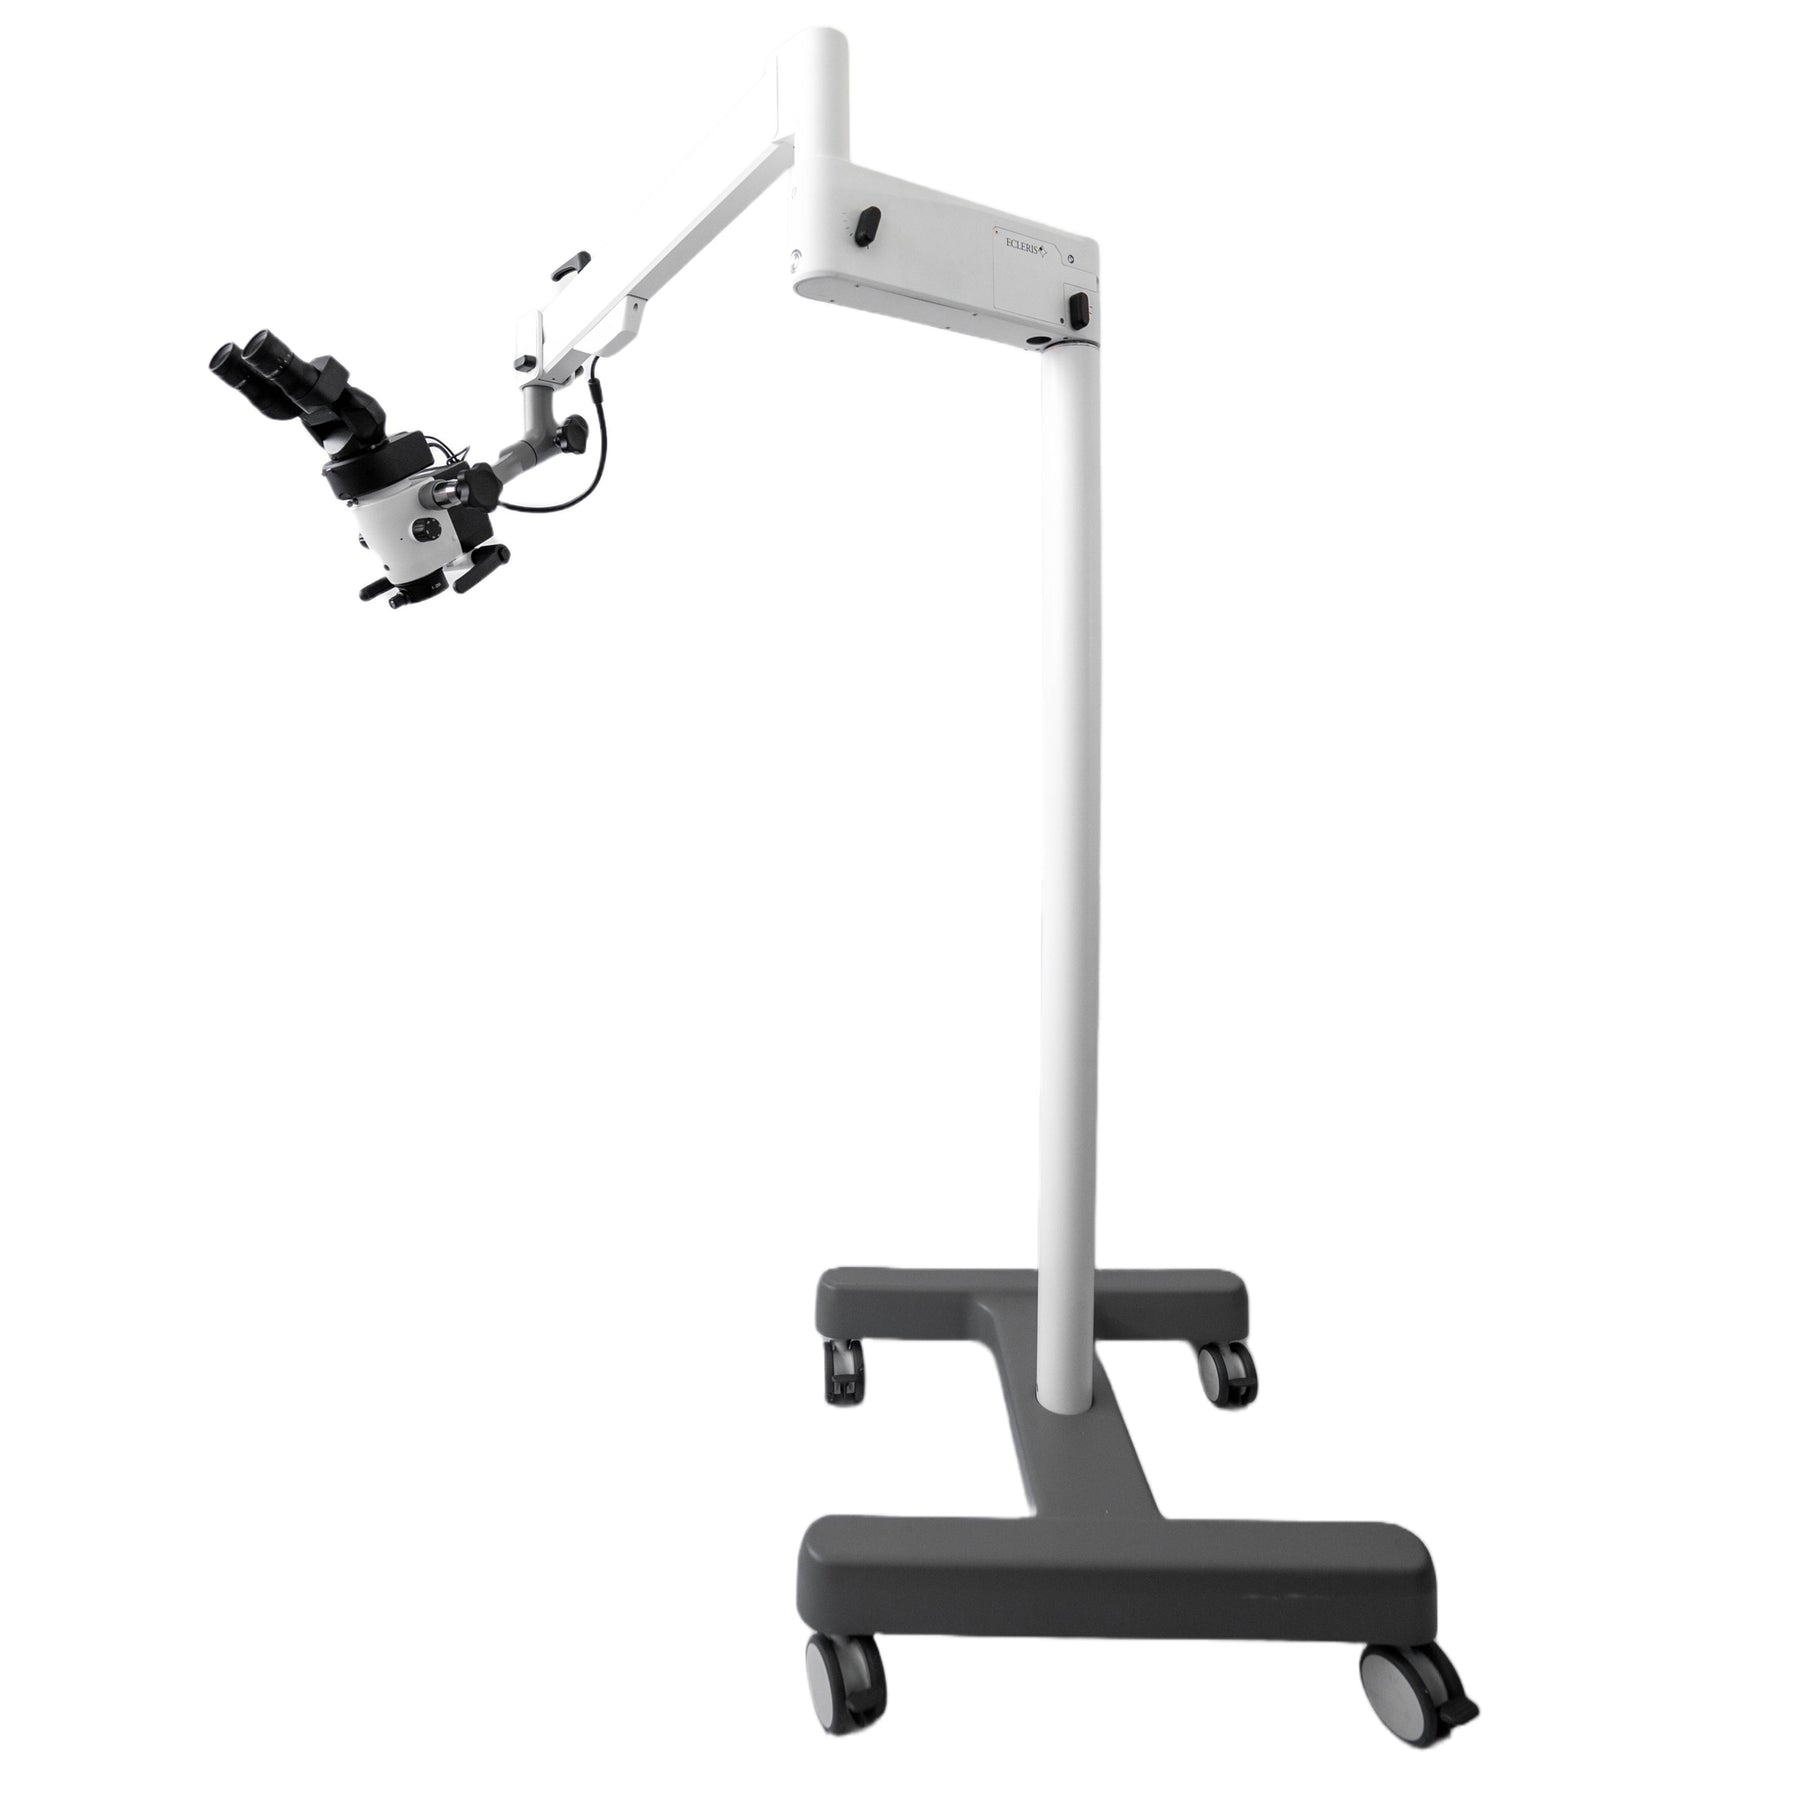 The OM-200 operating microscope is the latest model in the Ecleris OM-Series range. The floating pantographic pneumatic arm offers superior manoeuvrability. 